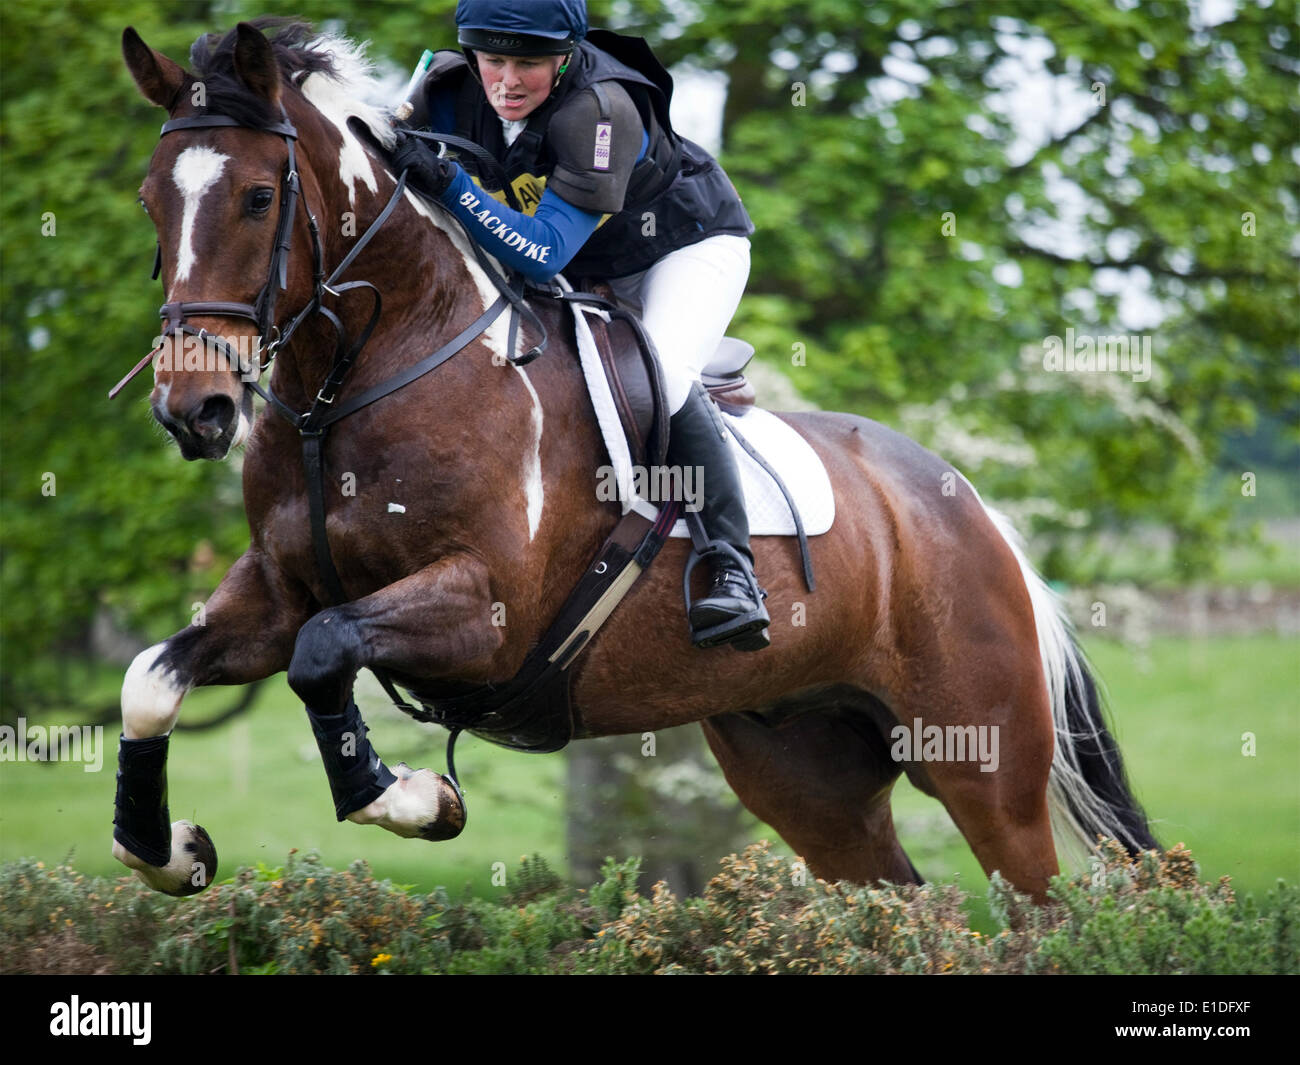 Belsay, England - May 31, 2014: A competitor in the cross country section clears a jump at the 2014 Belsay Horse Trials, held for the second year running in the grounds of Belsay Castle in Northumberland, England. Belsay Castle is managed by English Heritage and is open to the public all year. Stock Photo